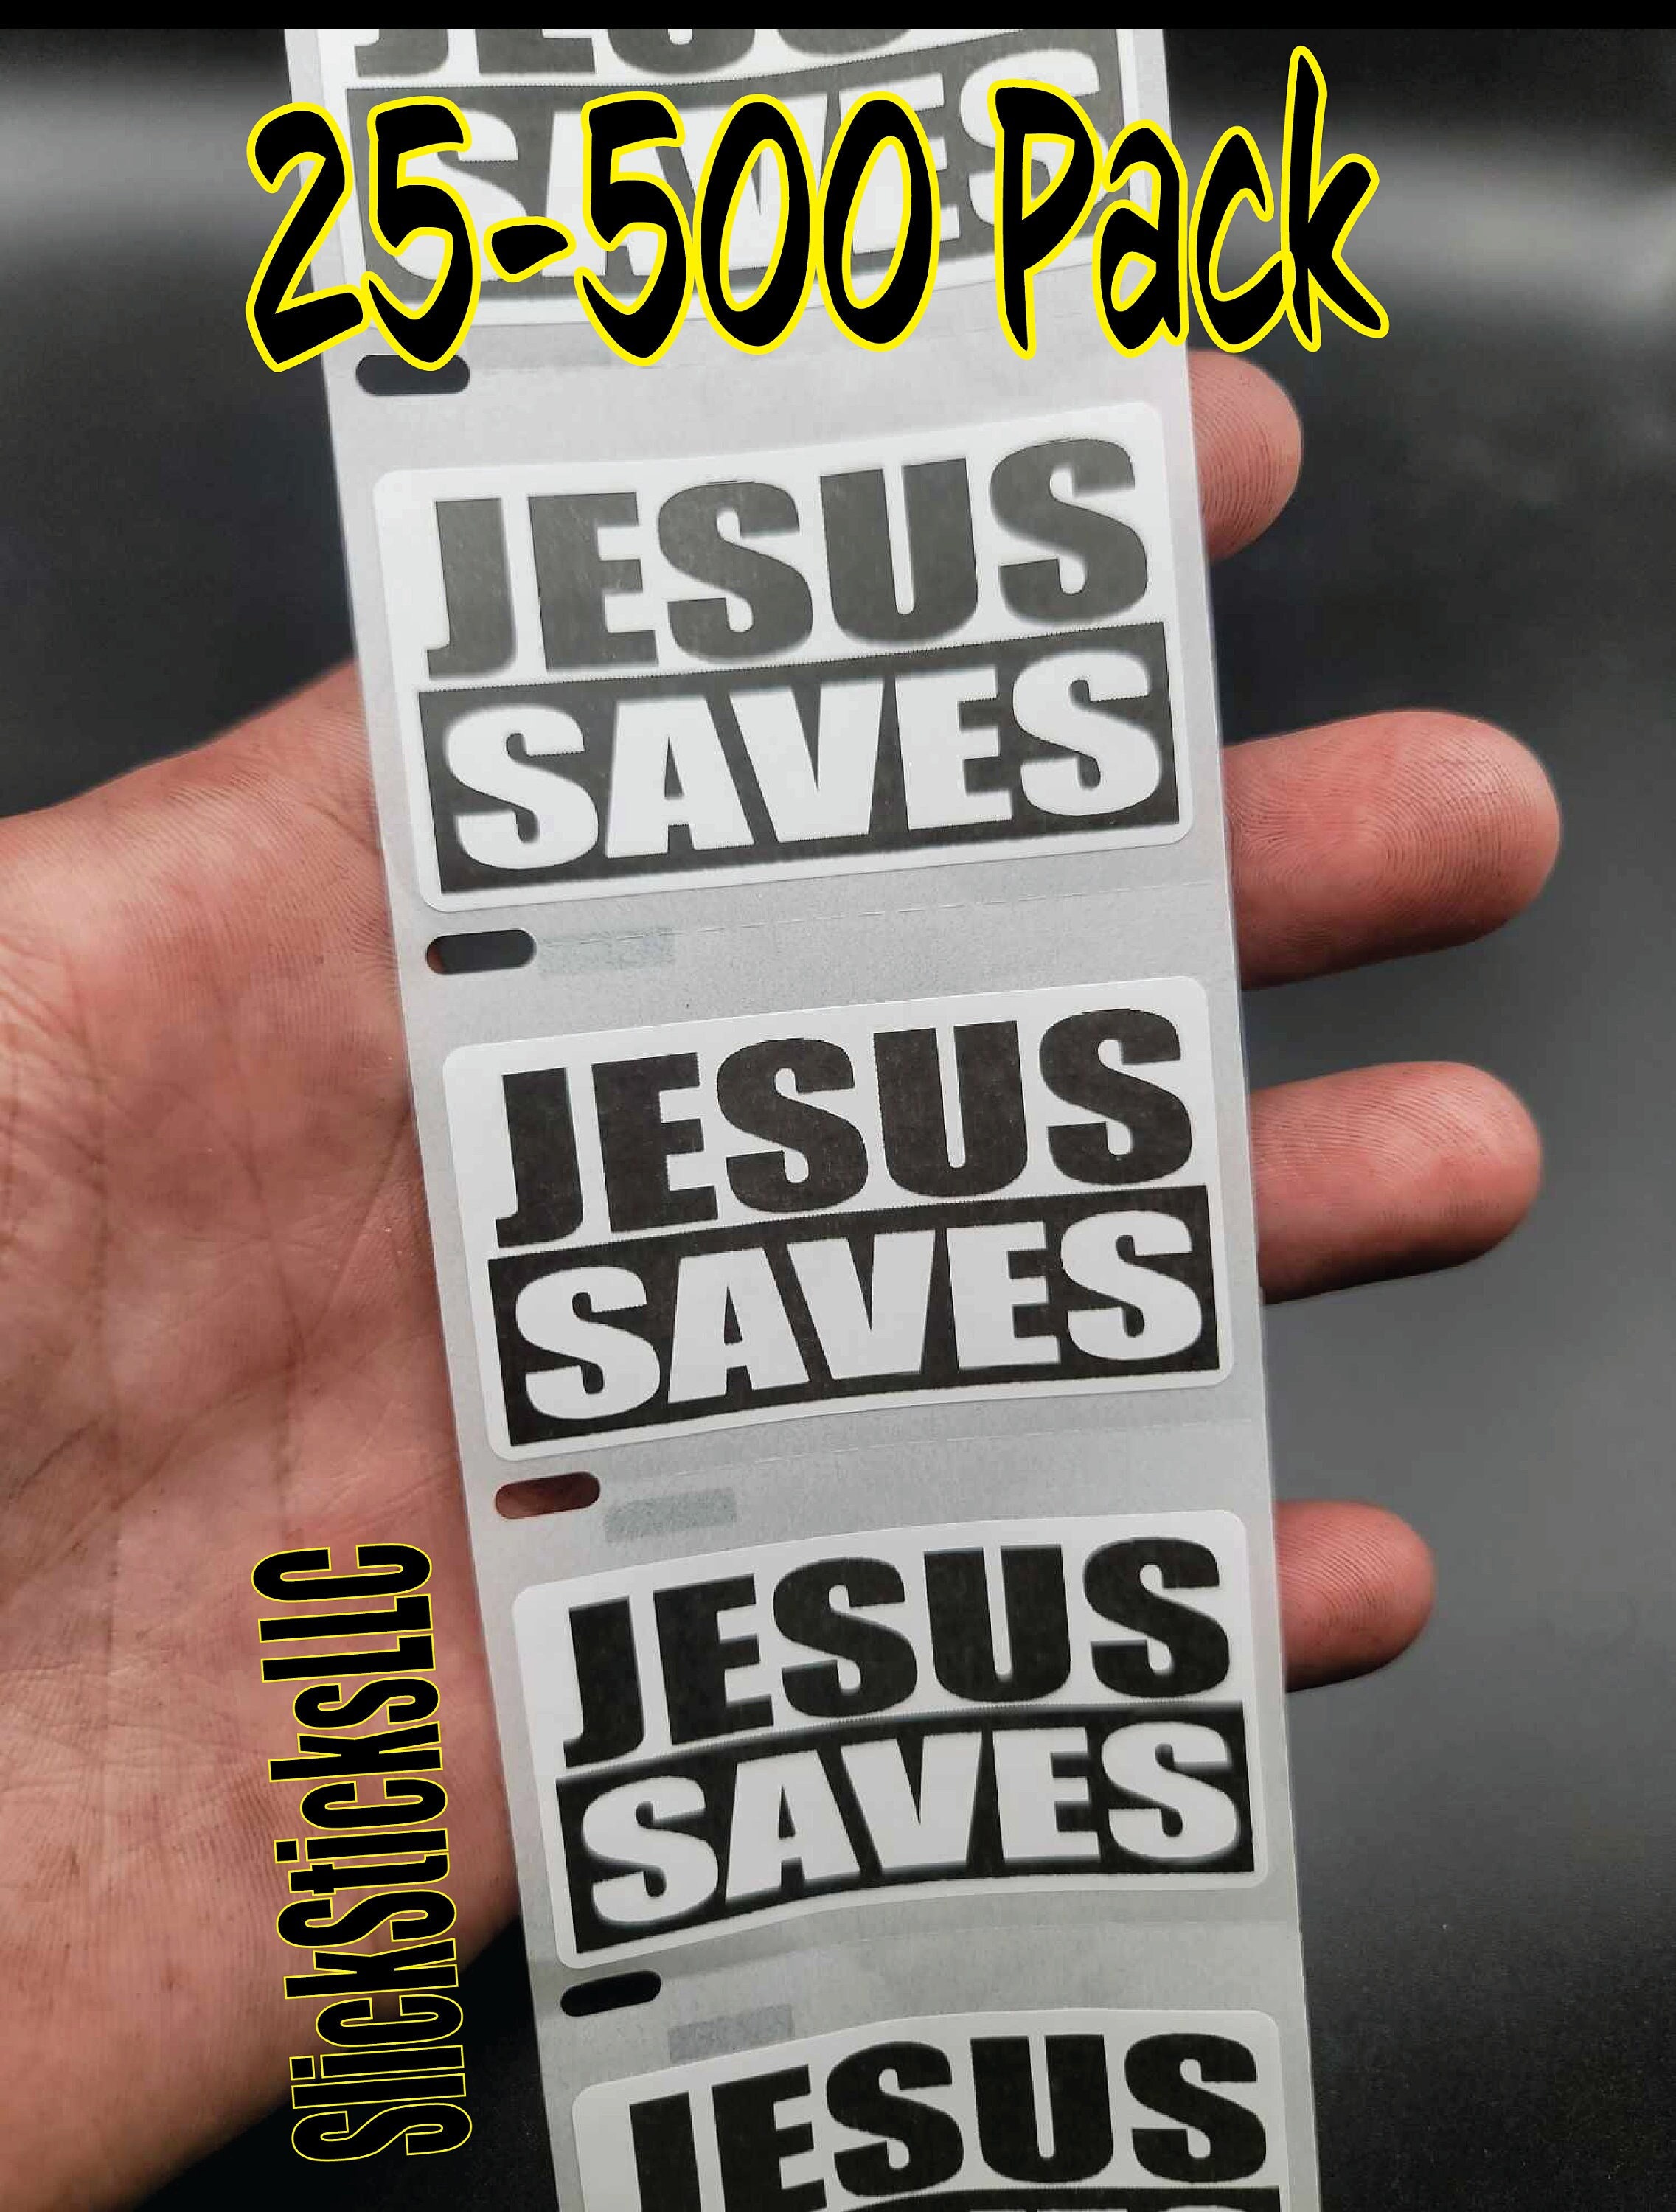 Jesus Saves Sticker for Sale by graceupongracee